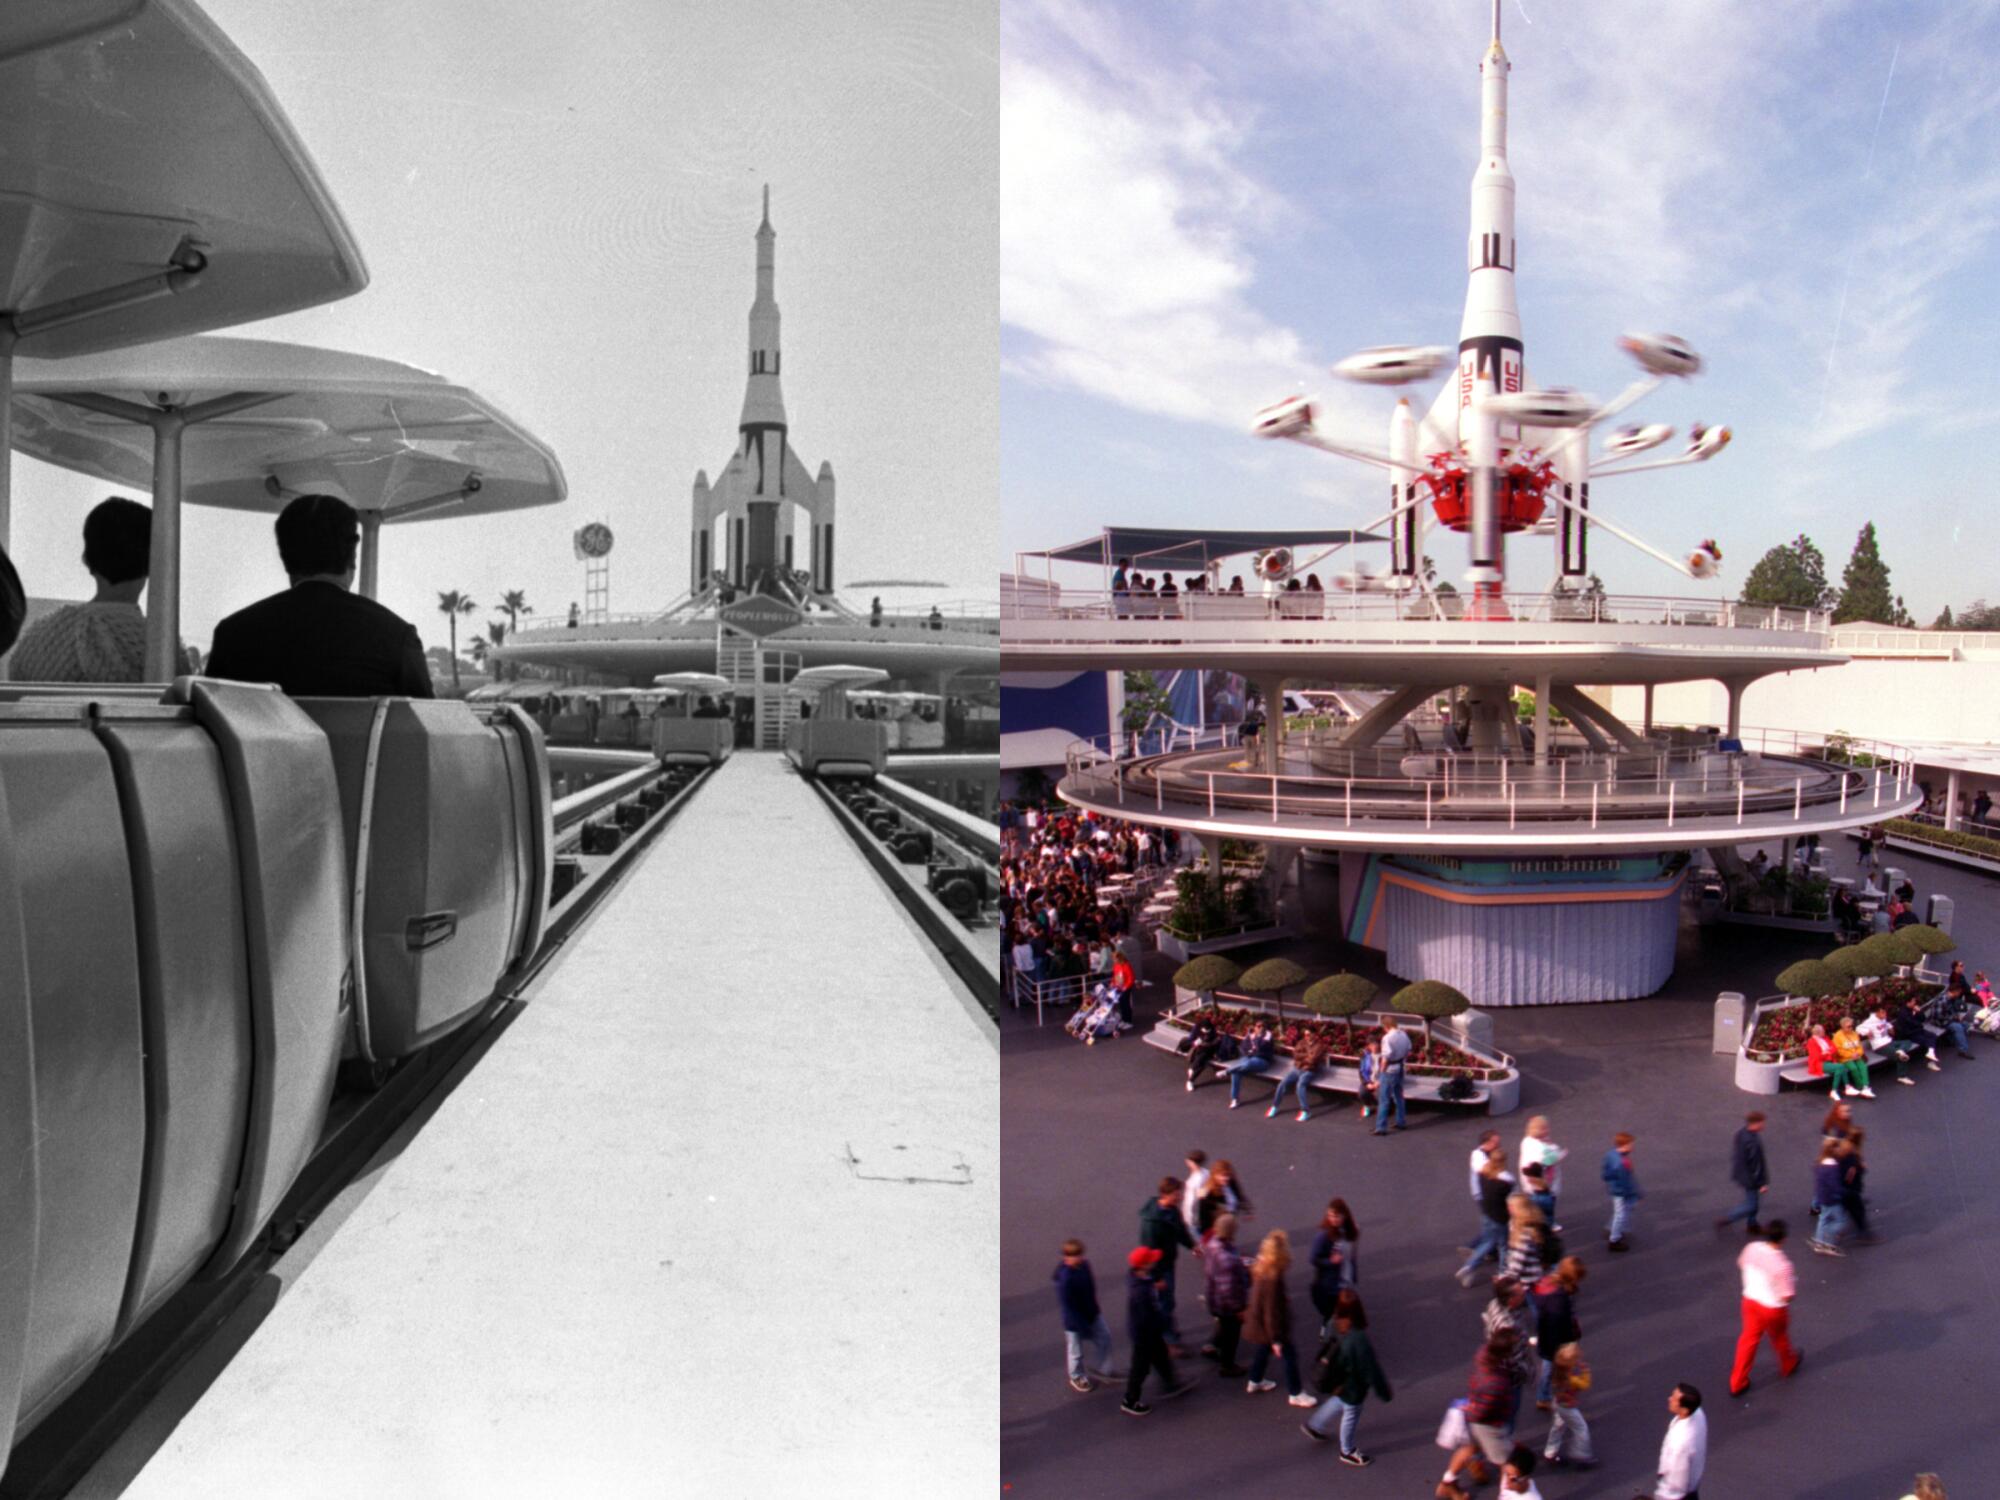 Two images: an elevated tram and a ride with spinning rockets.